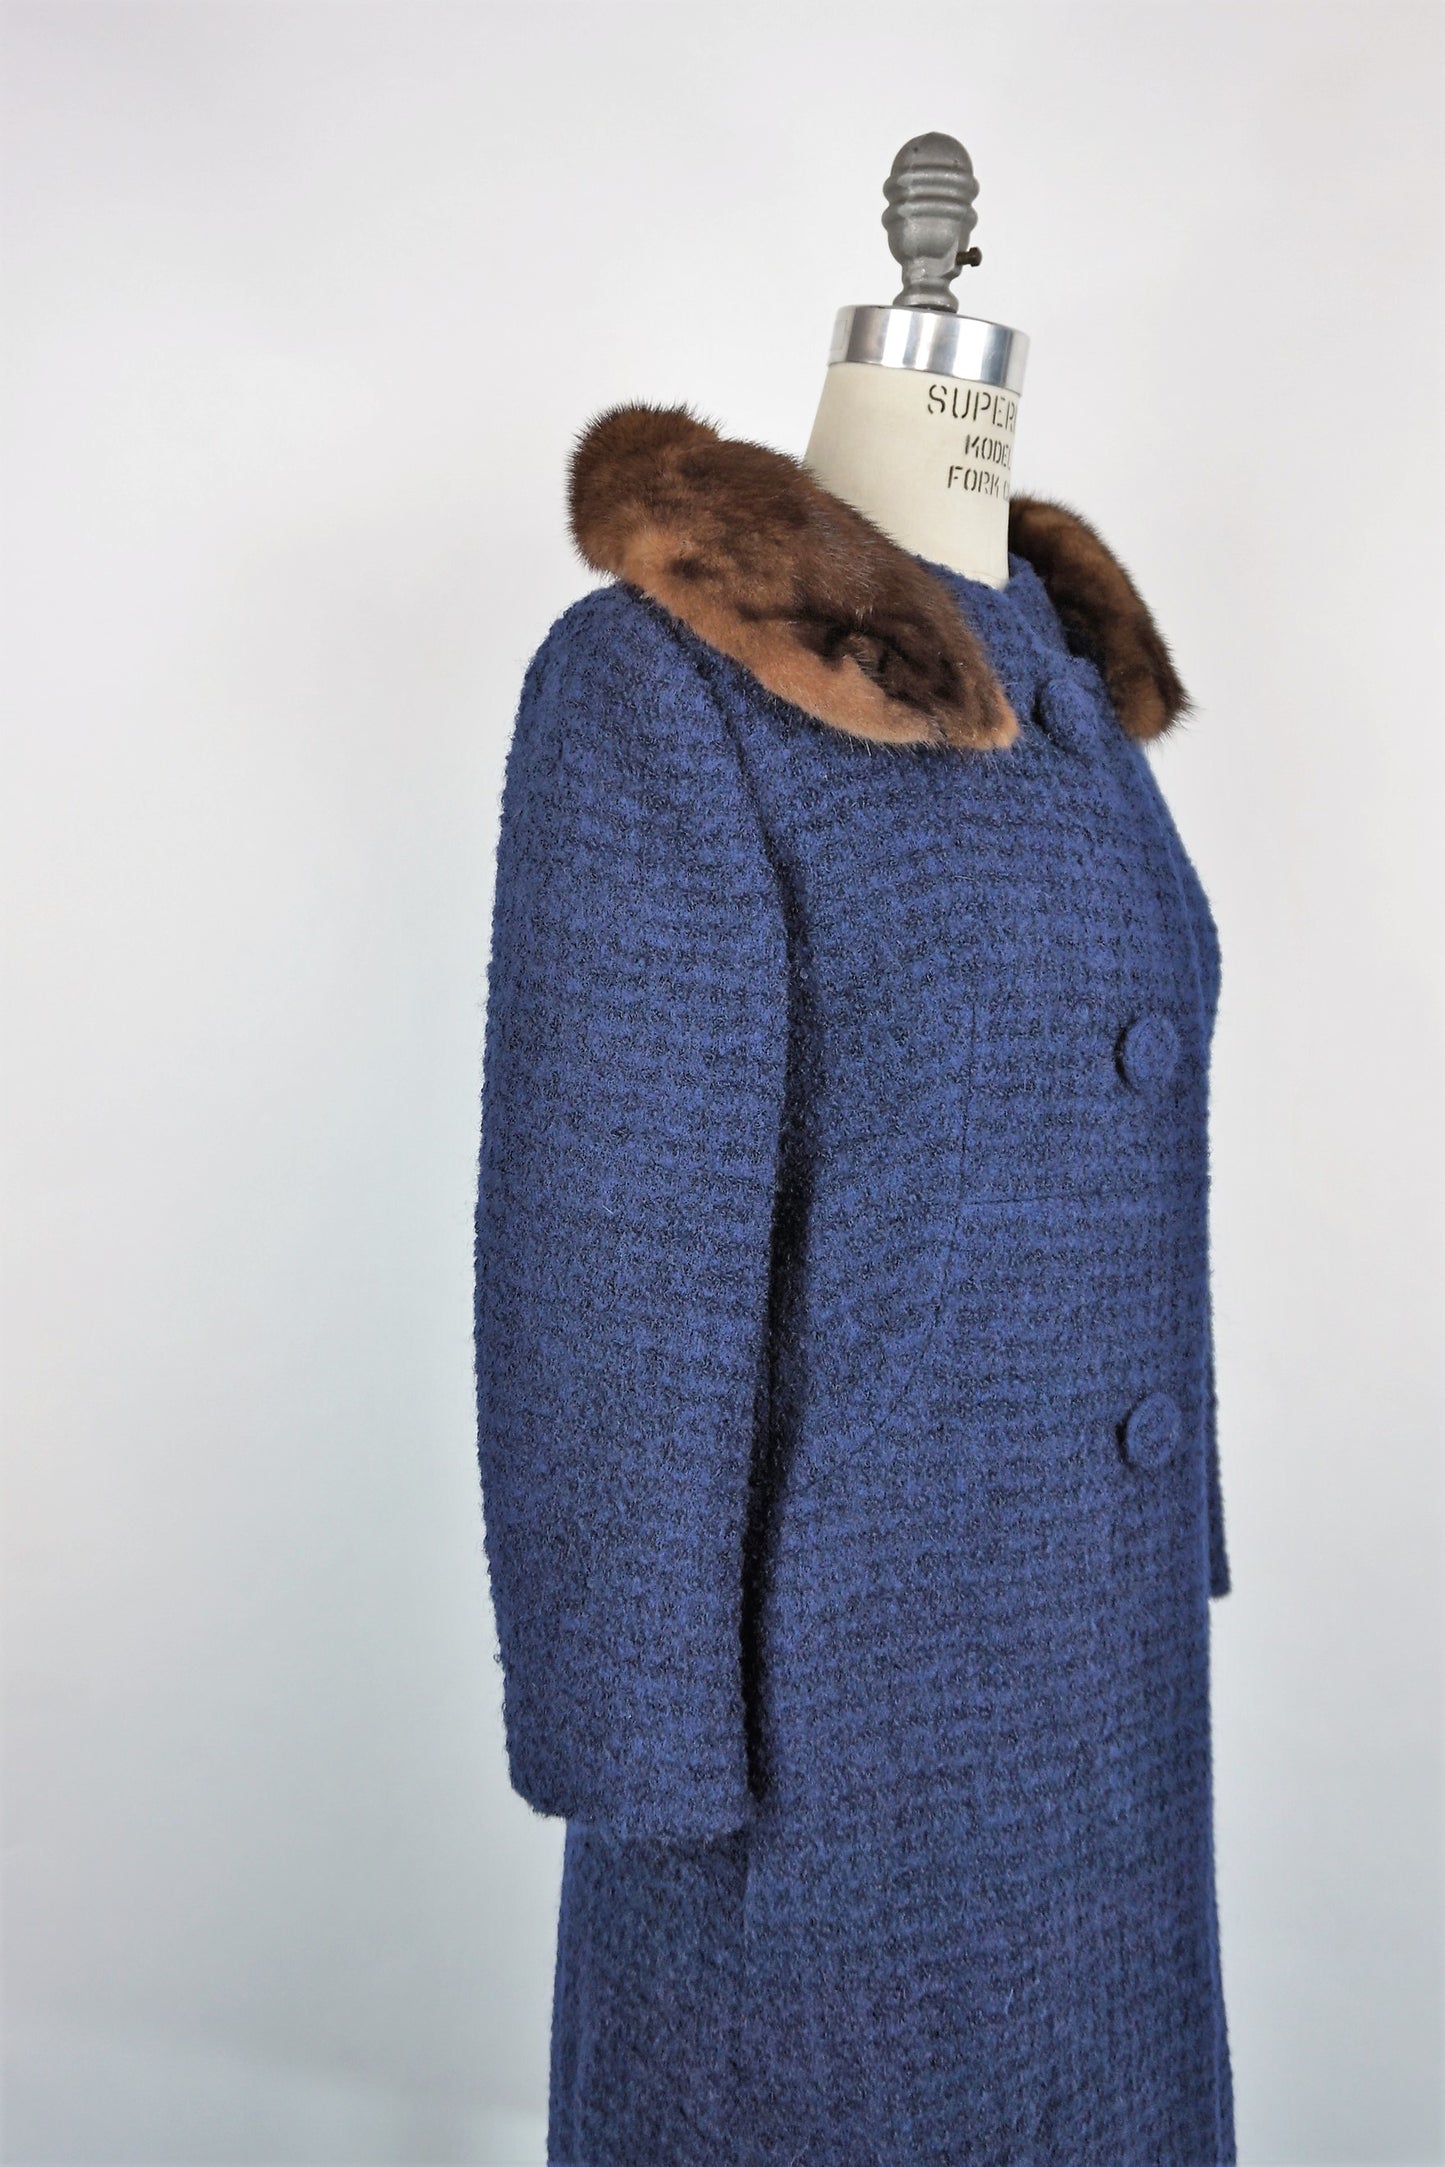 Vintage 1960s Navy Blue Wool Coat With Fur Collar